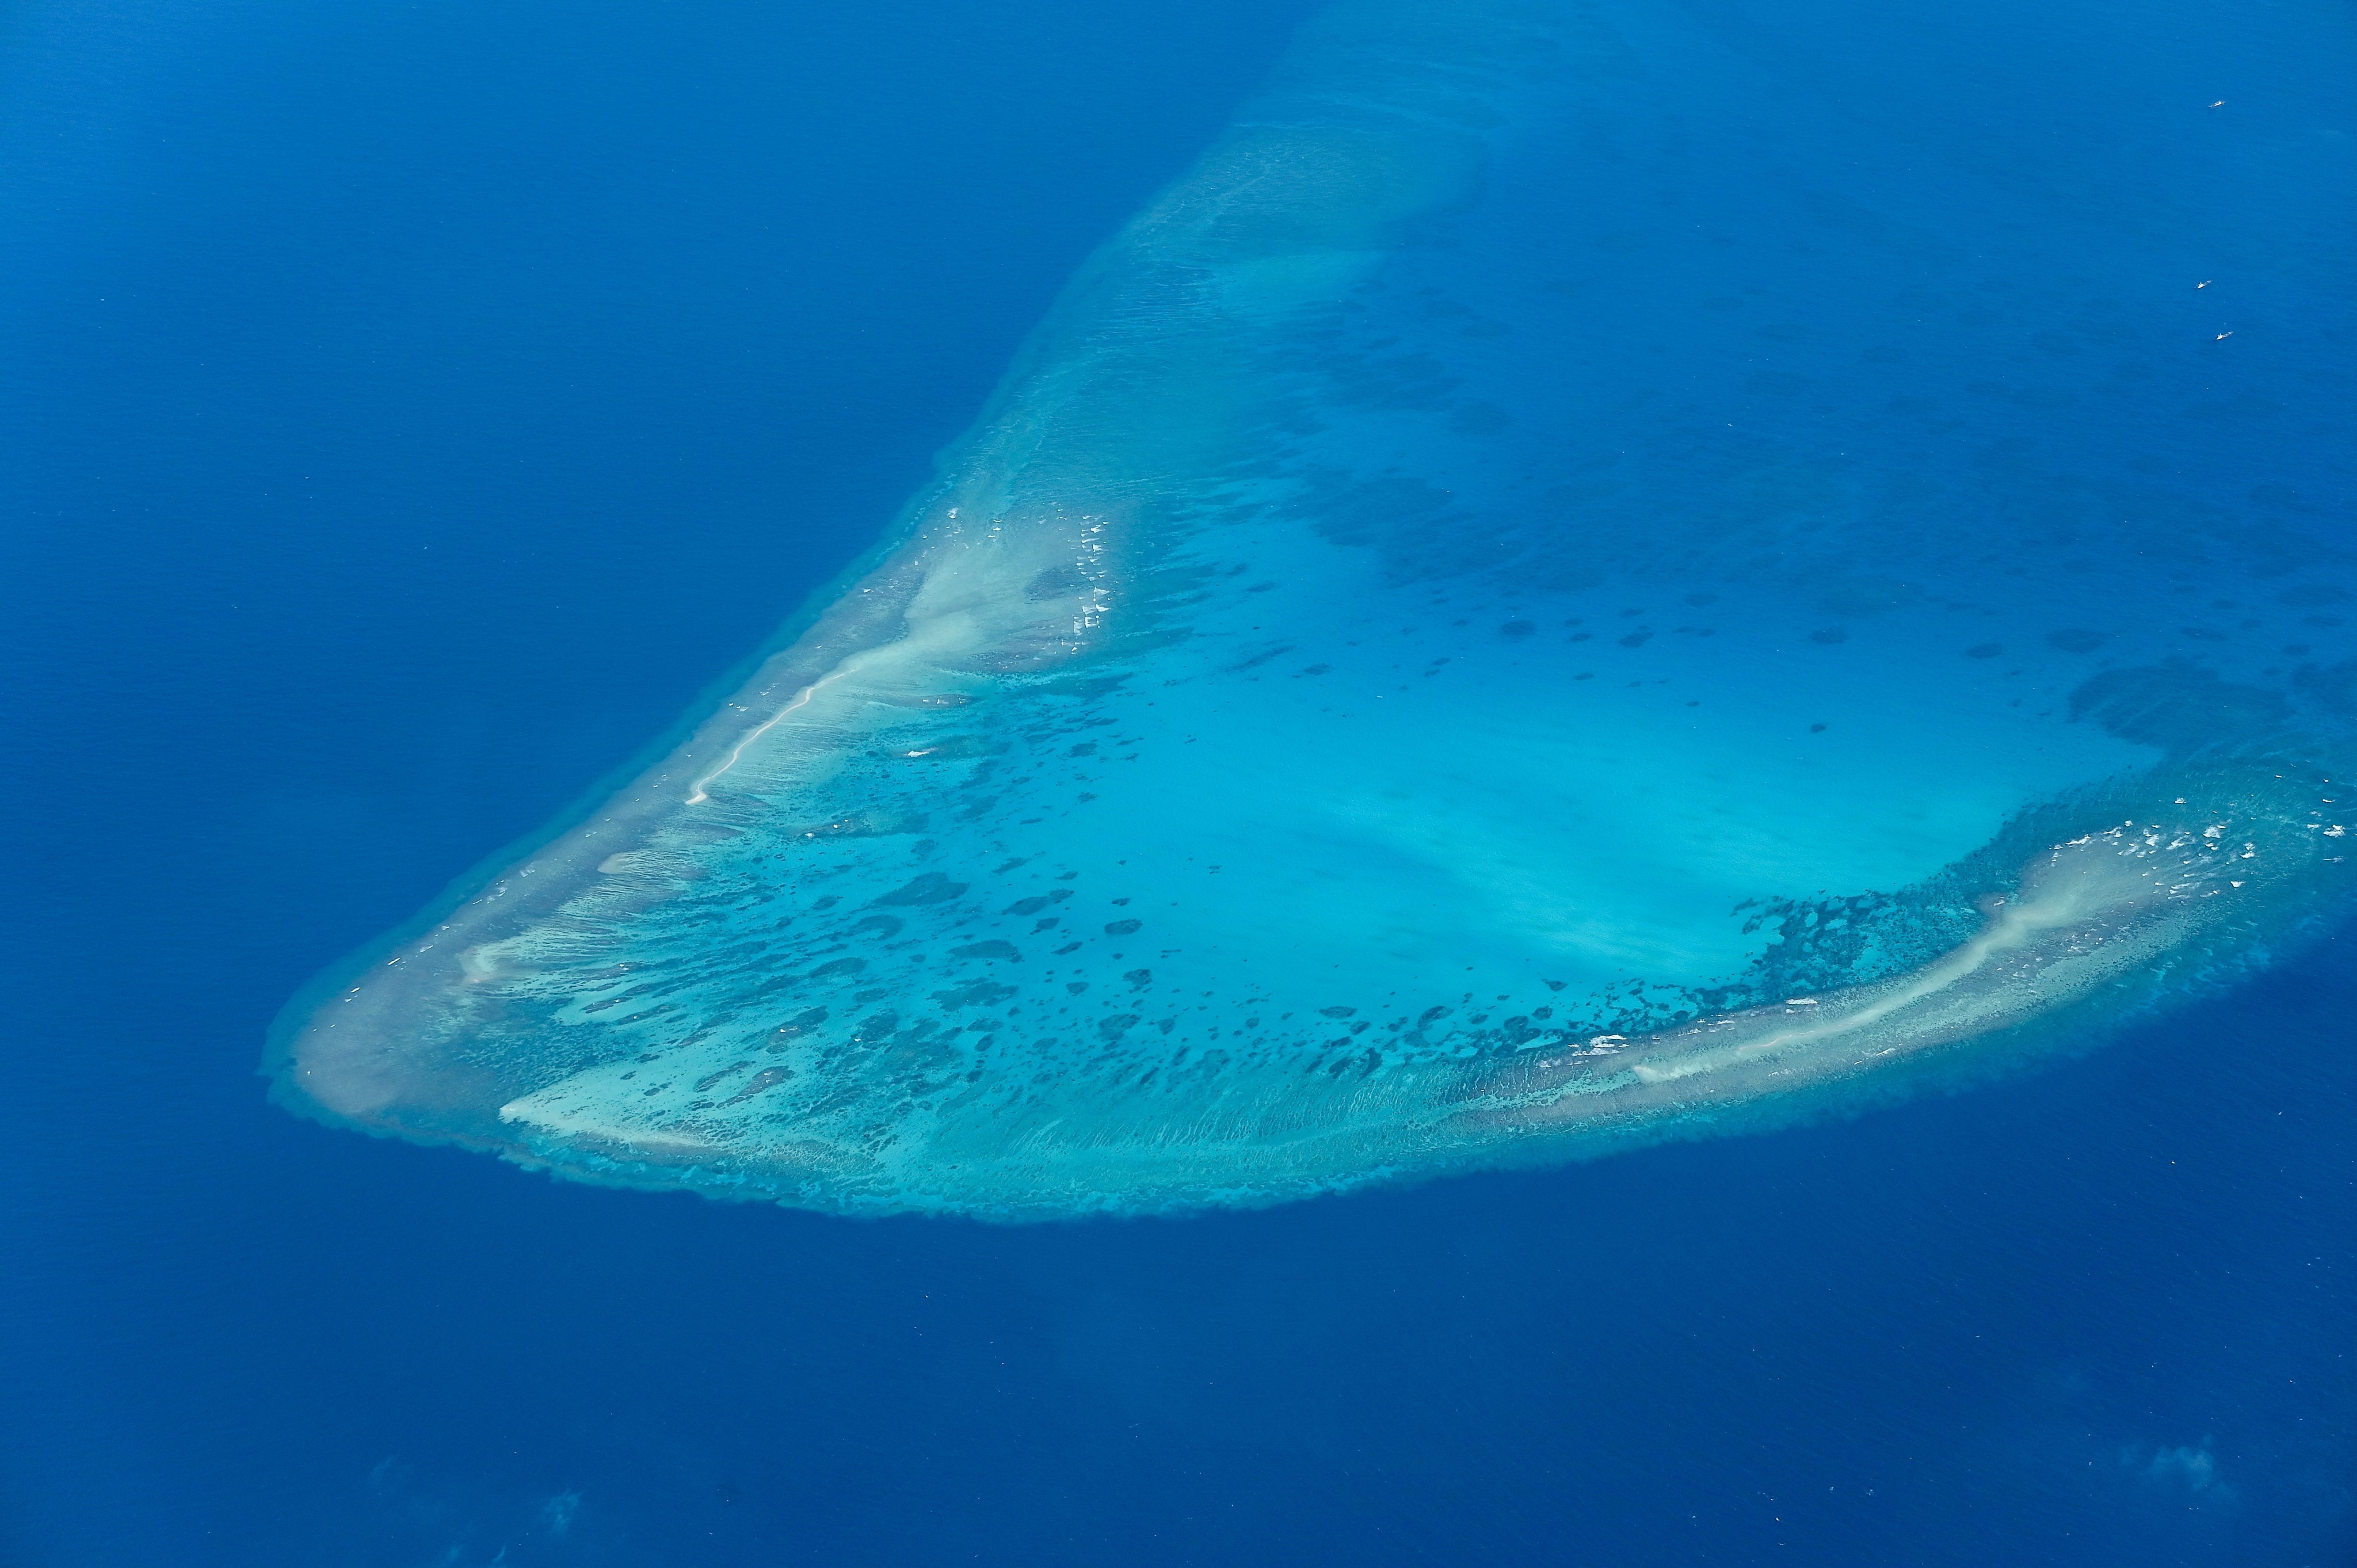 A view of Iroquois Reef in the South China Sea. The Philippine coastguard says its inspections at the reef and Sabina Shoal recently show “severe damage” to some corals. Photo: AFP